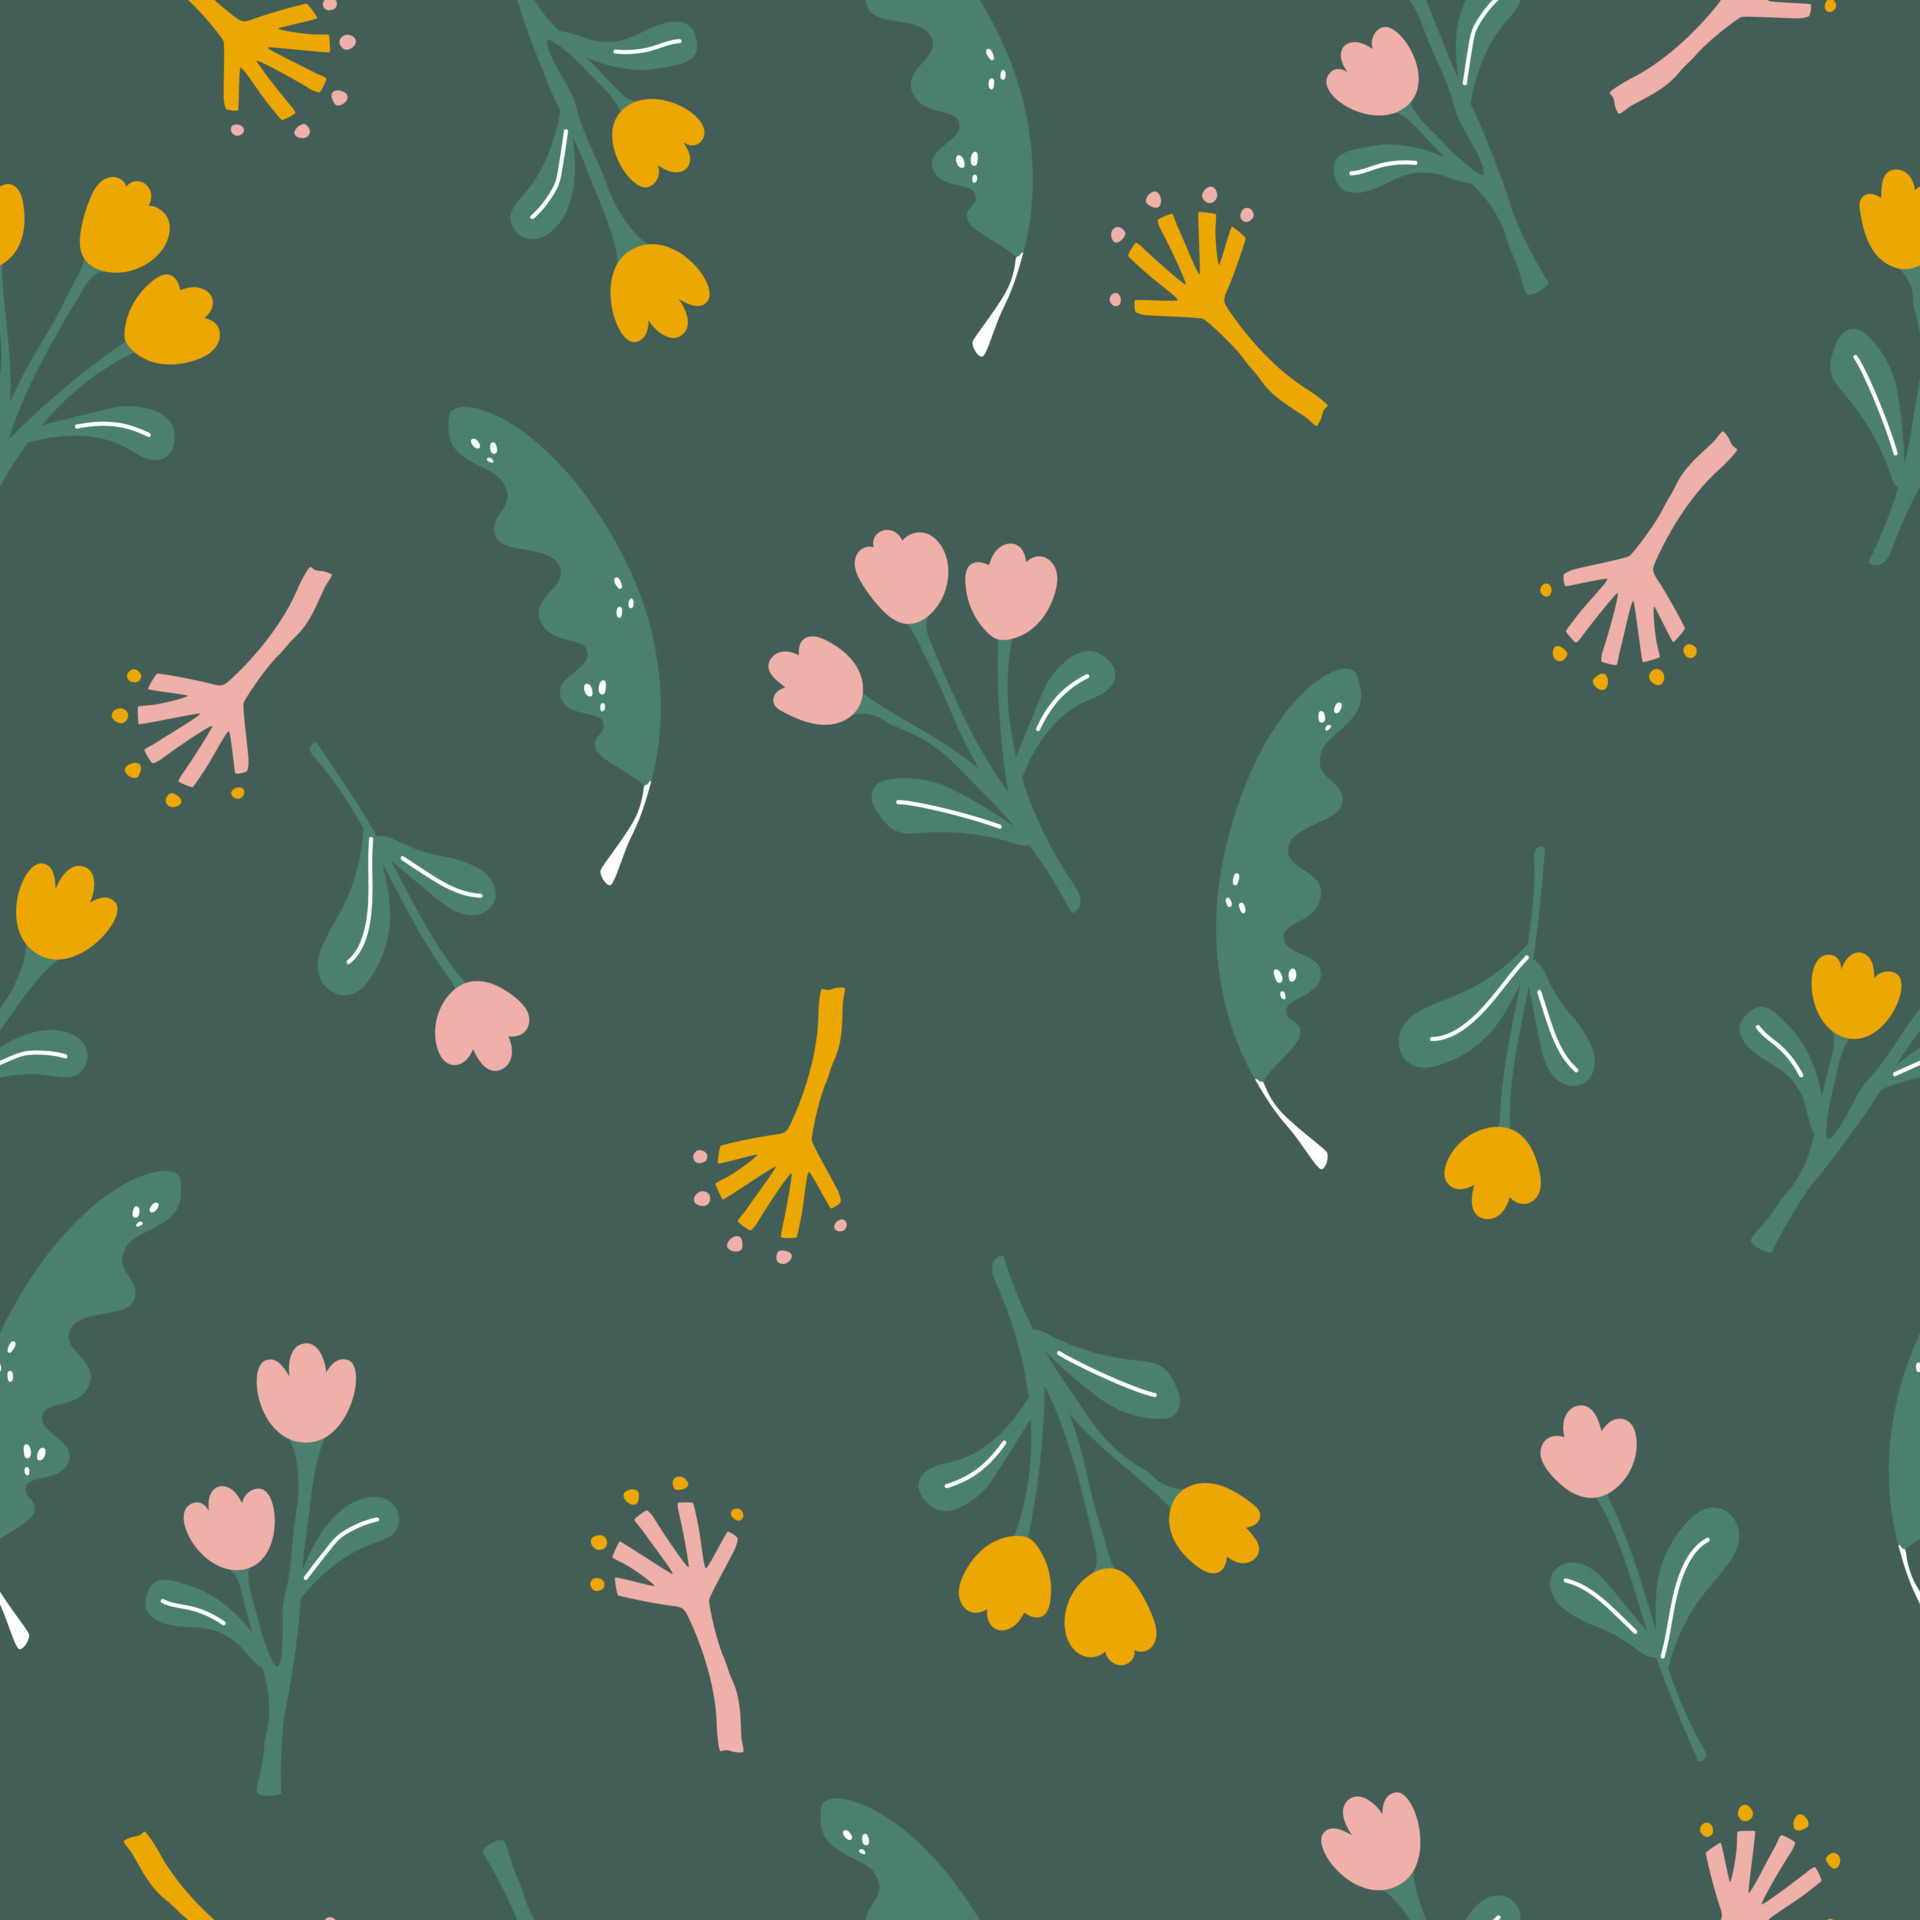 70s Retro Floral Seamless Pattern. 60s and 70s Aesthetic Style